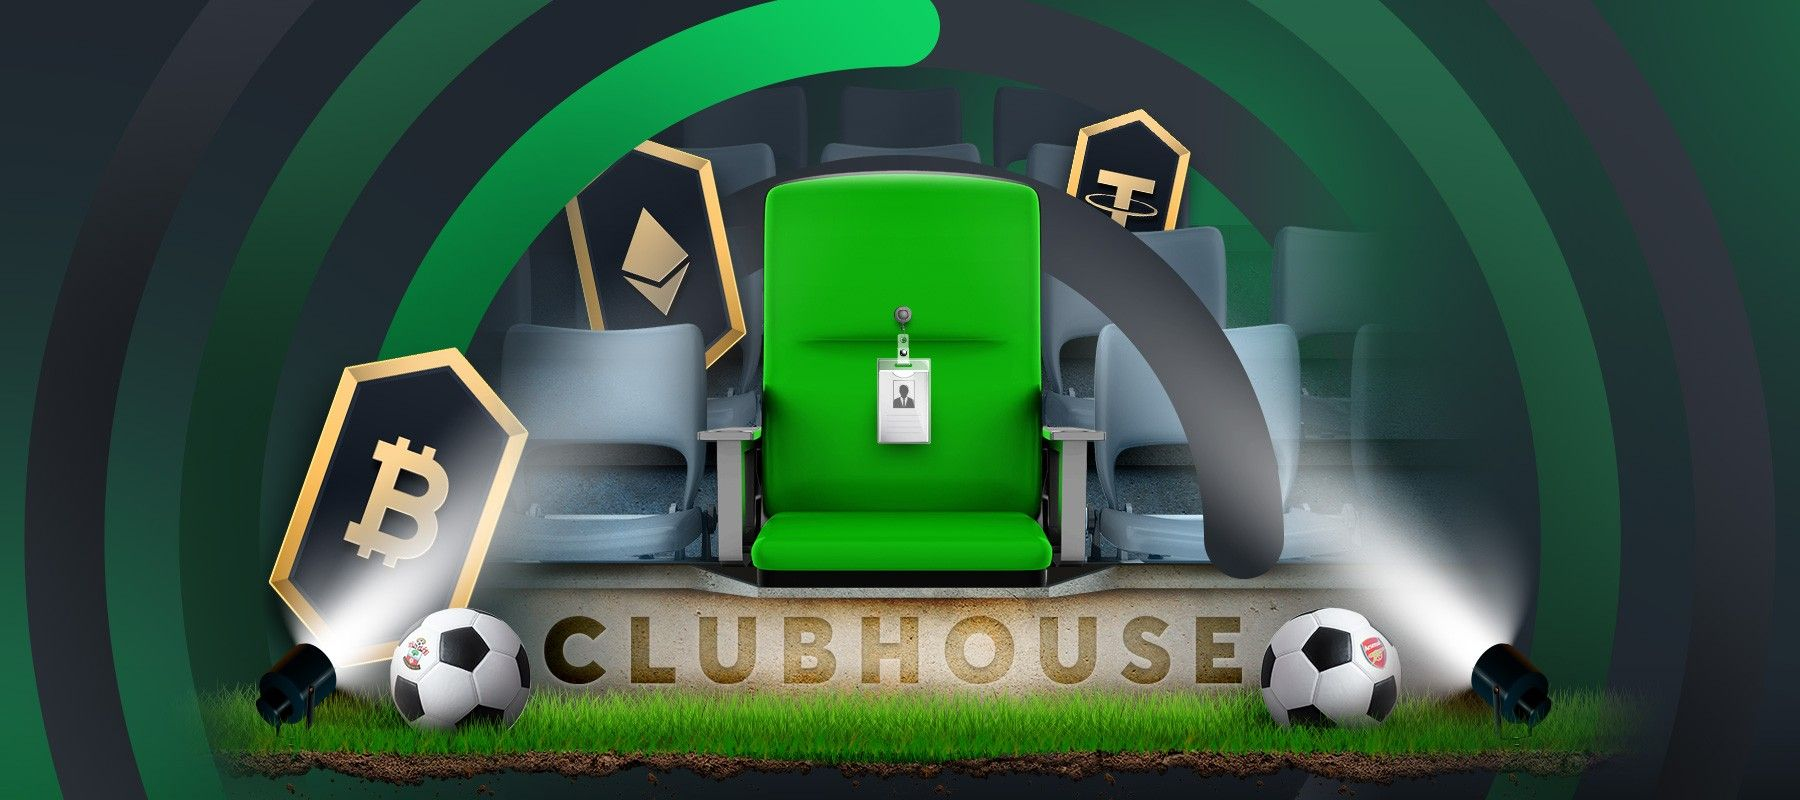 What's Hot on Clubhouse Right Now?